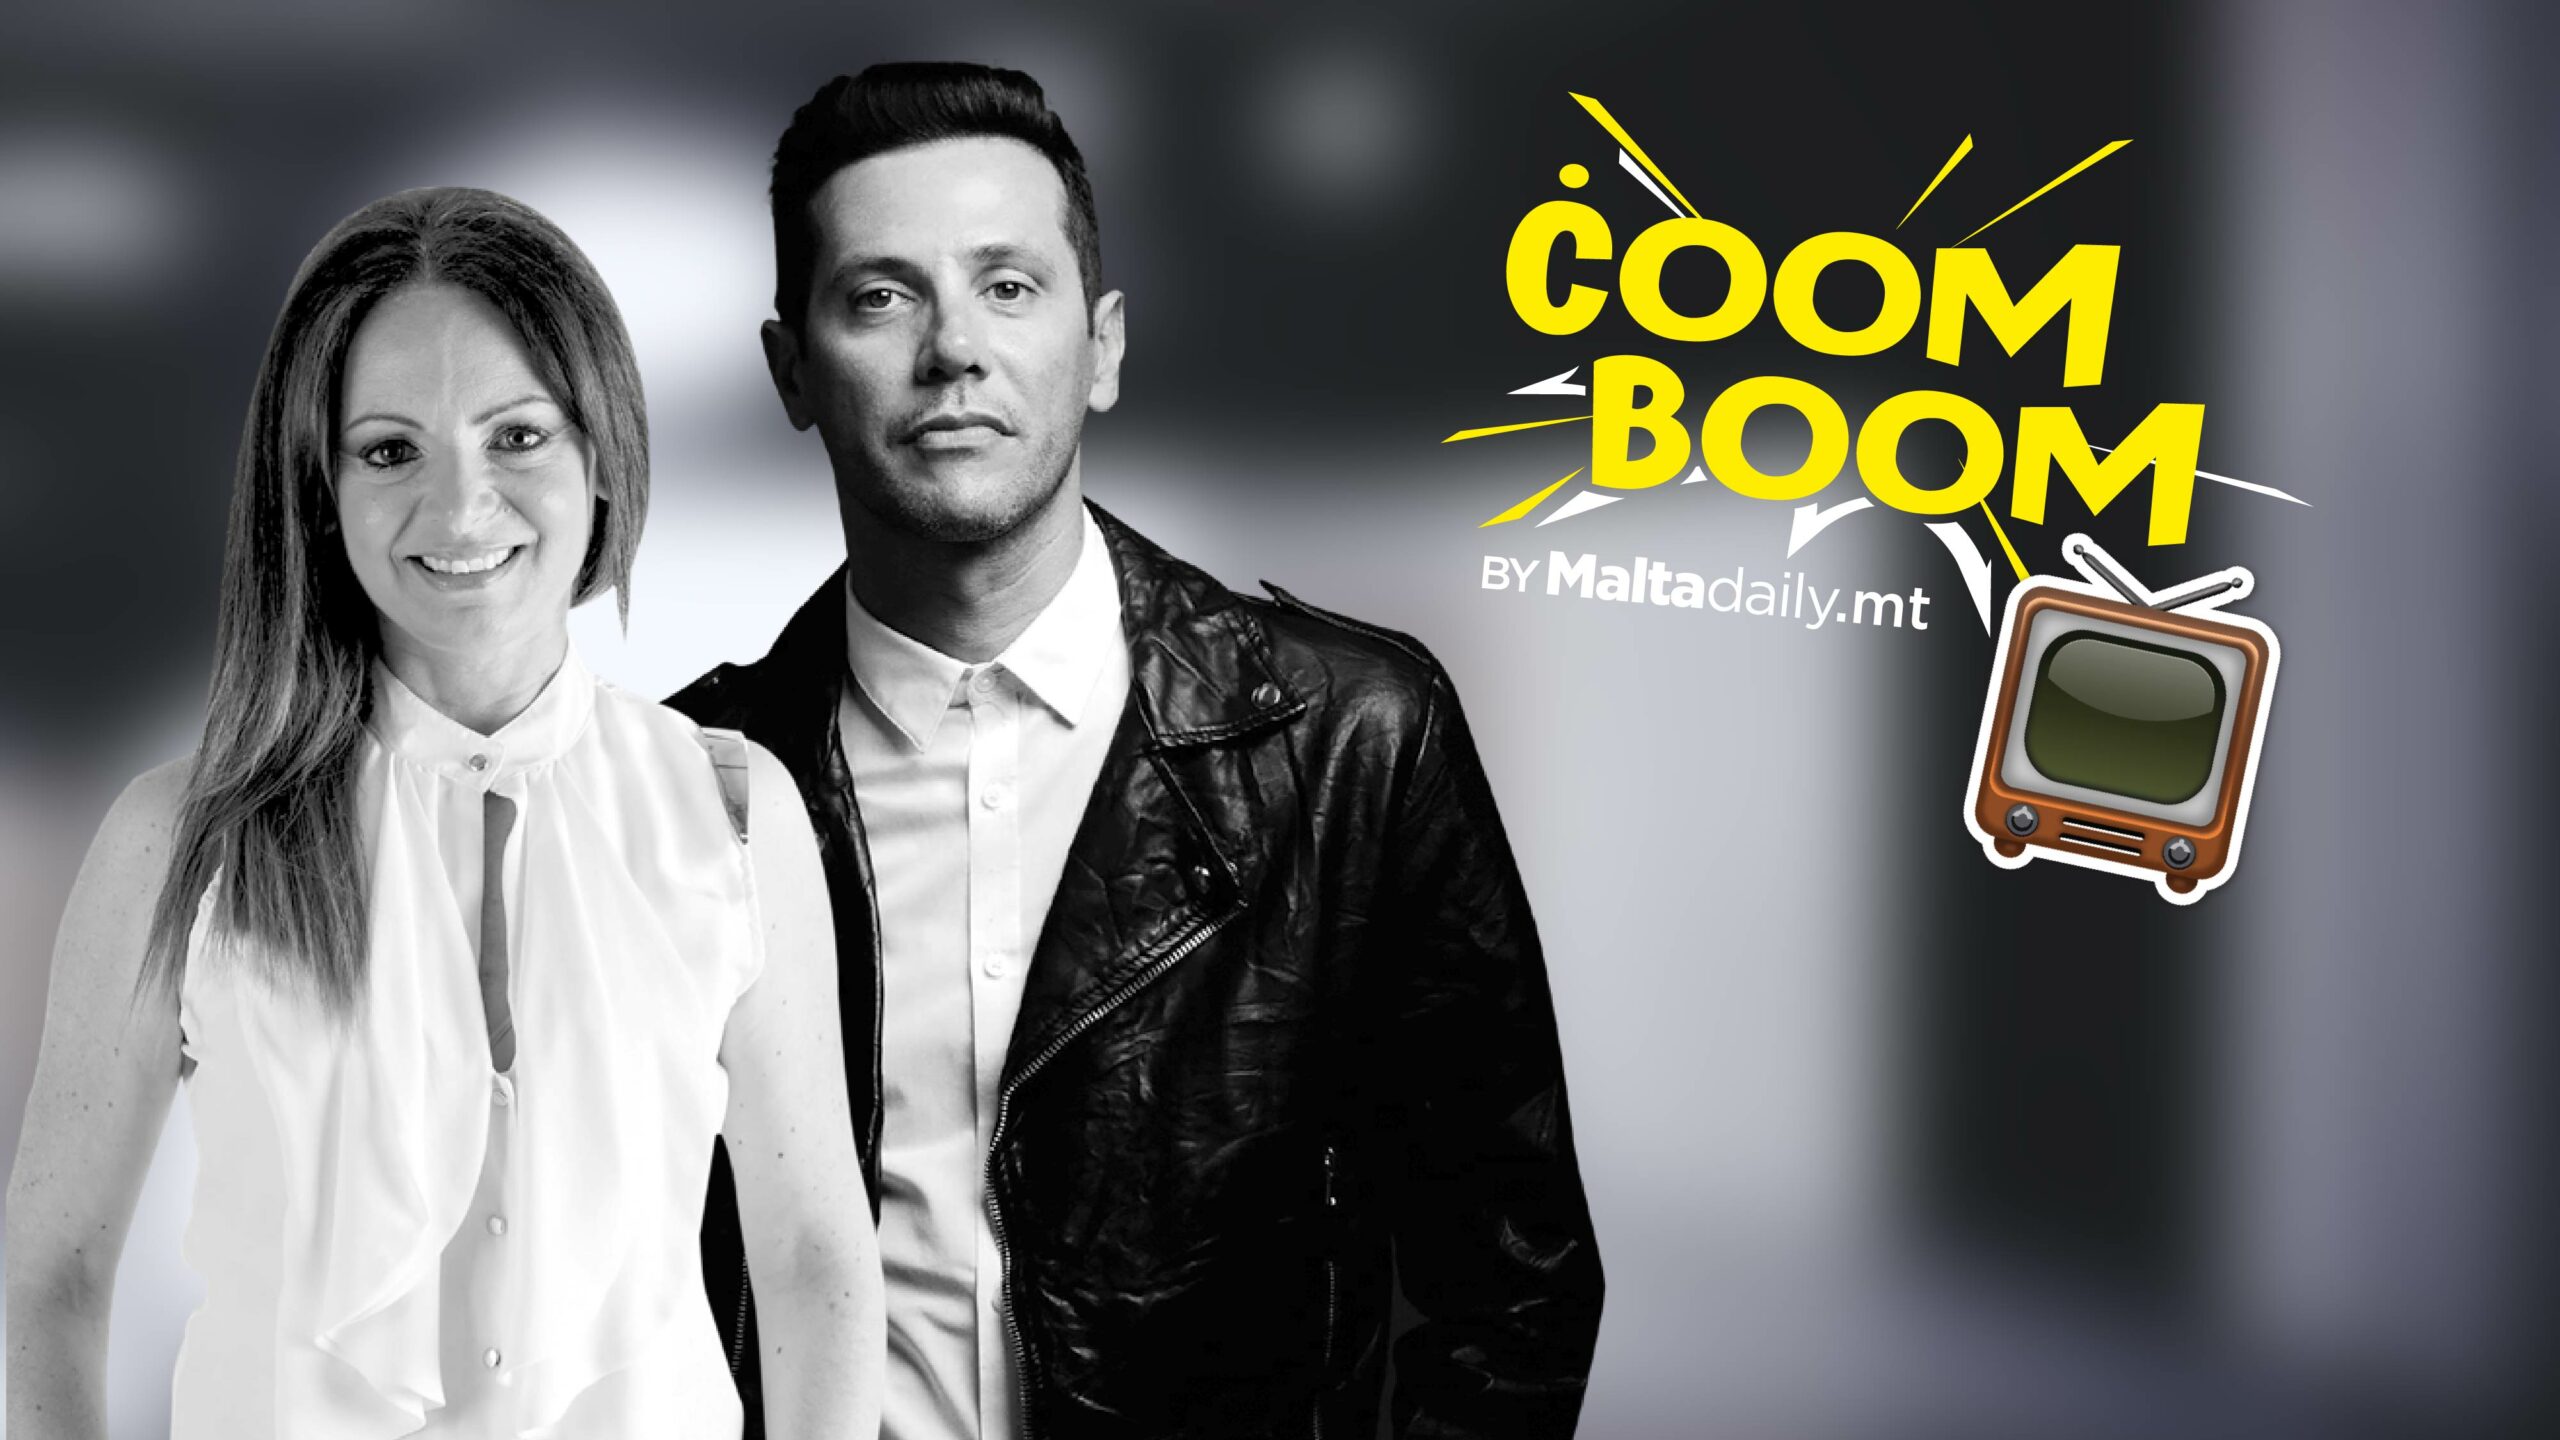 Watch Out! Malta Daily's new chat show Ċoom Boom is hitting your screens soon